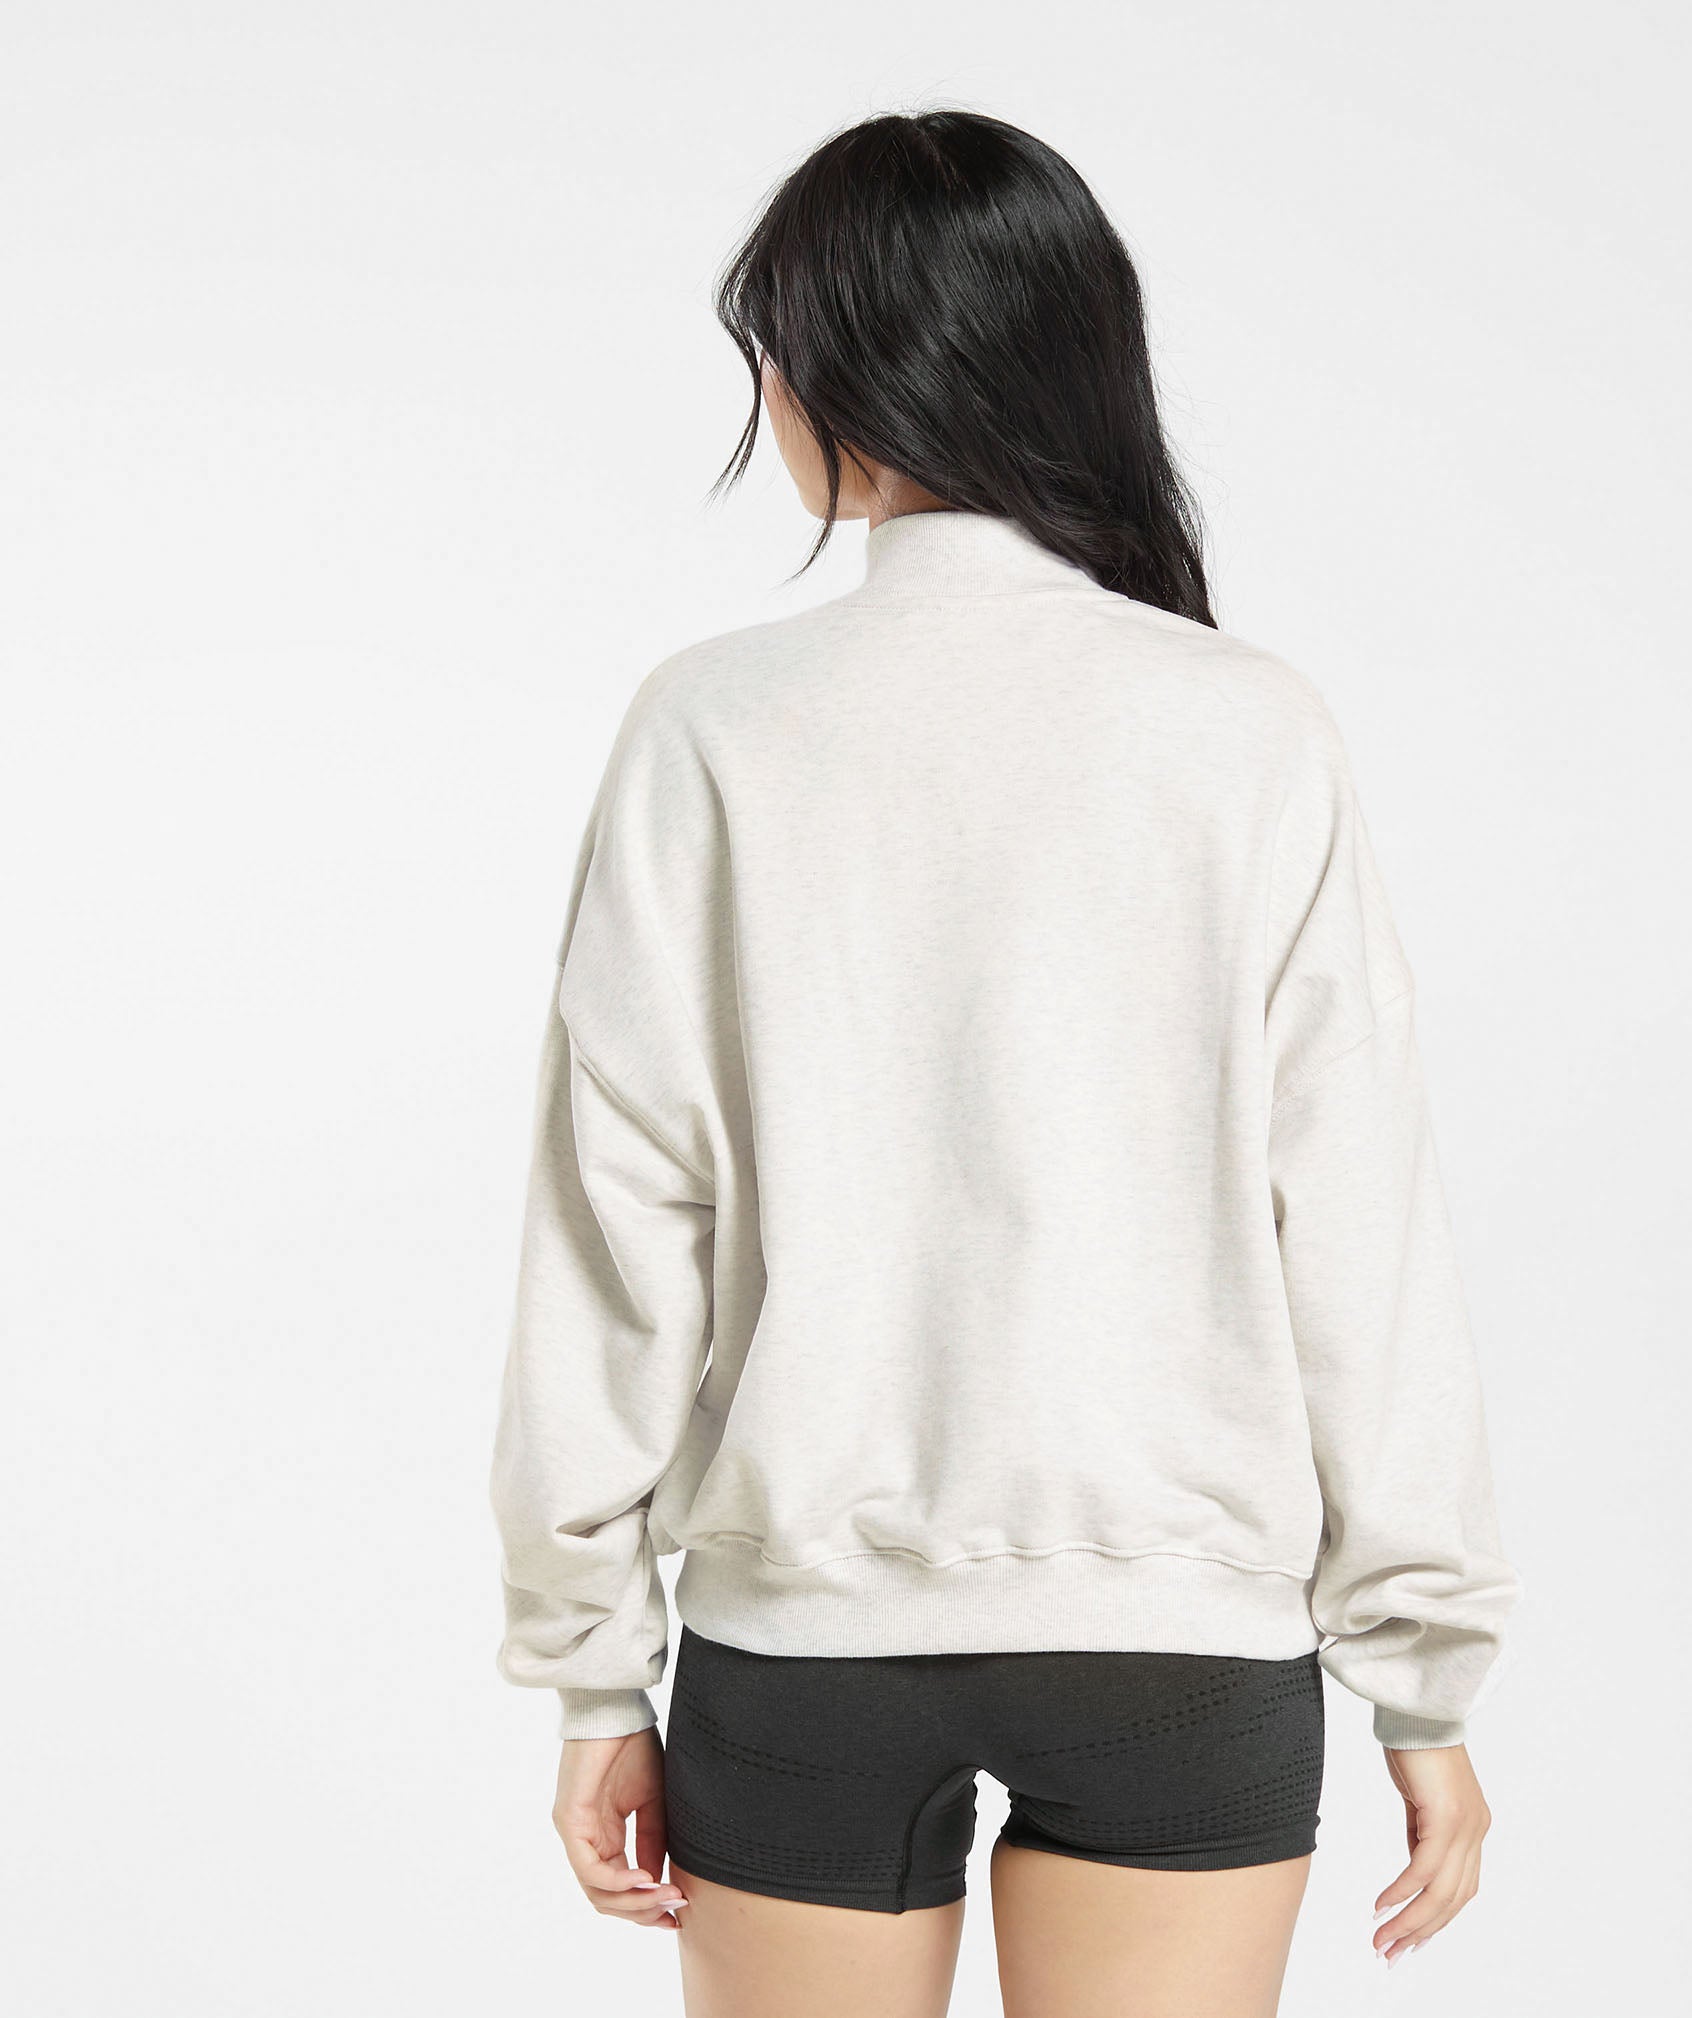 Rest Day Sweats 1/2 Zip Pullover in White Marl - view 2